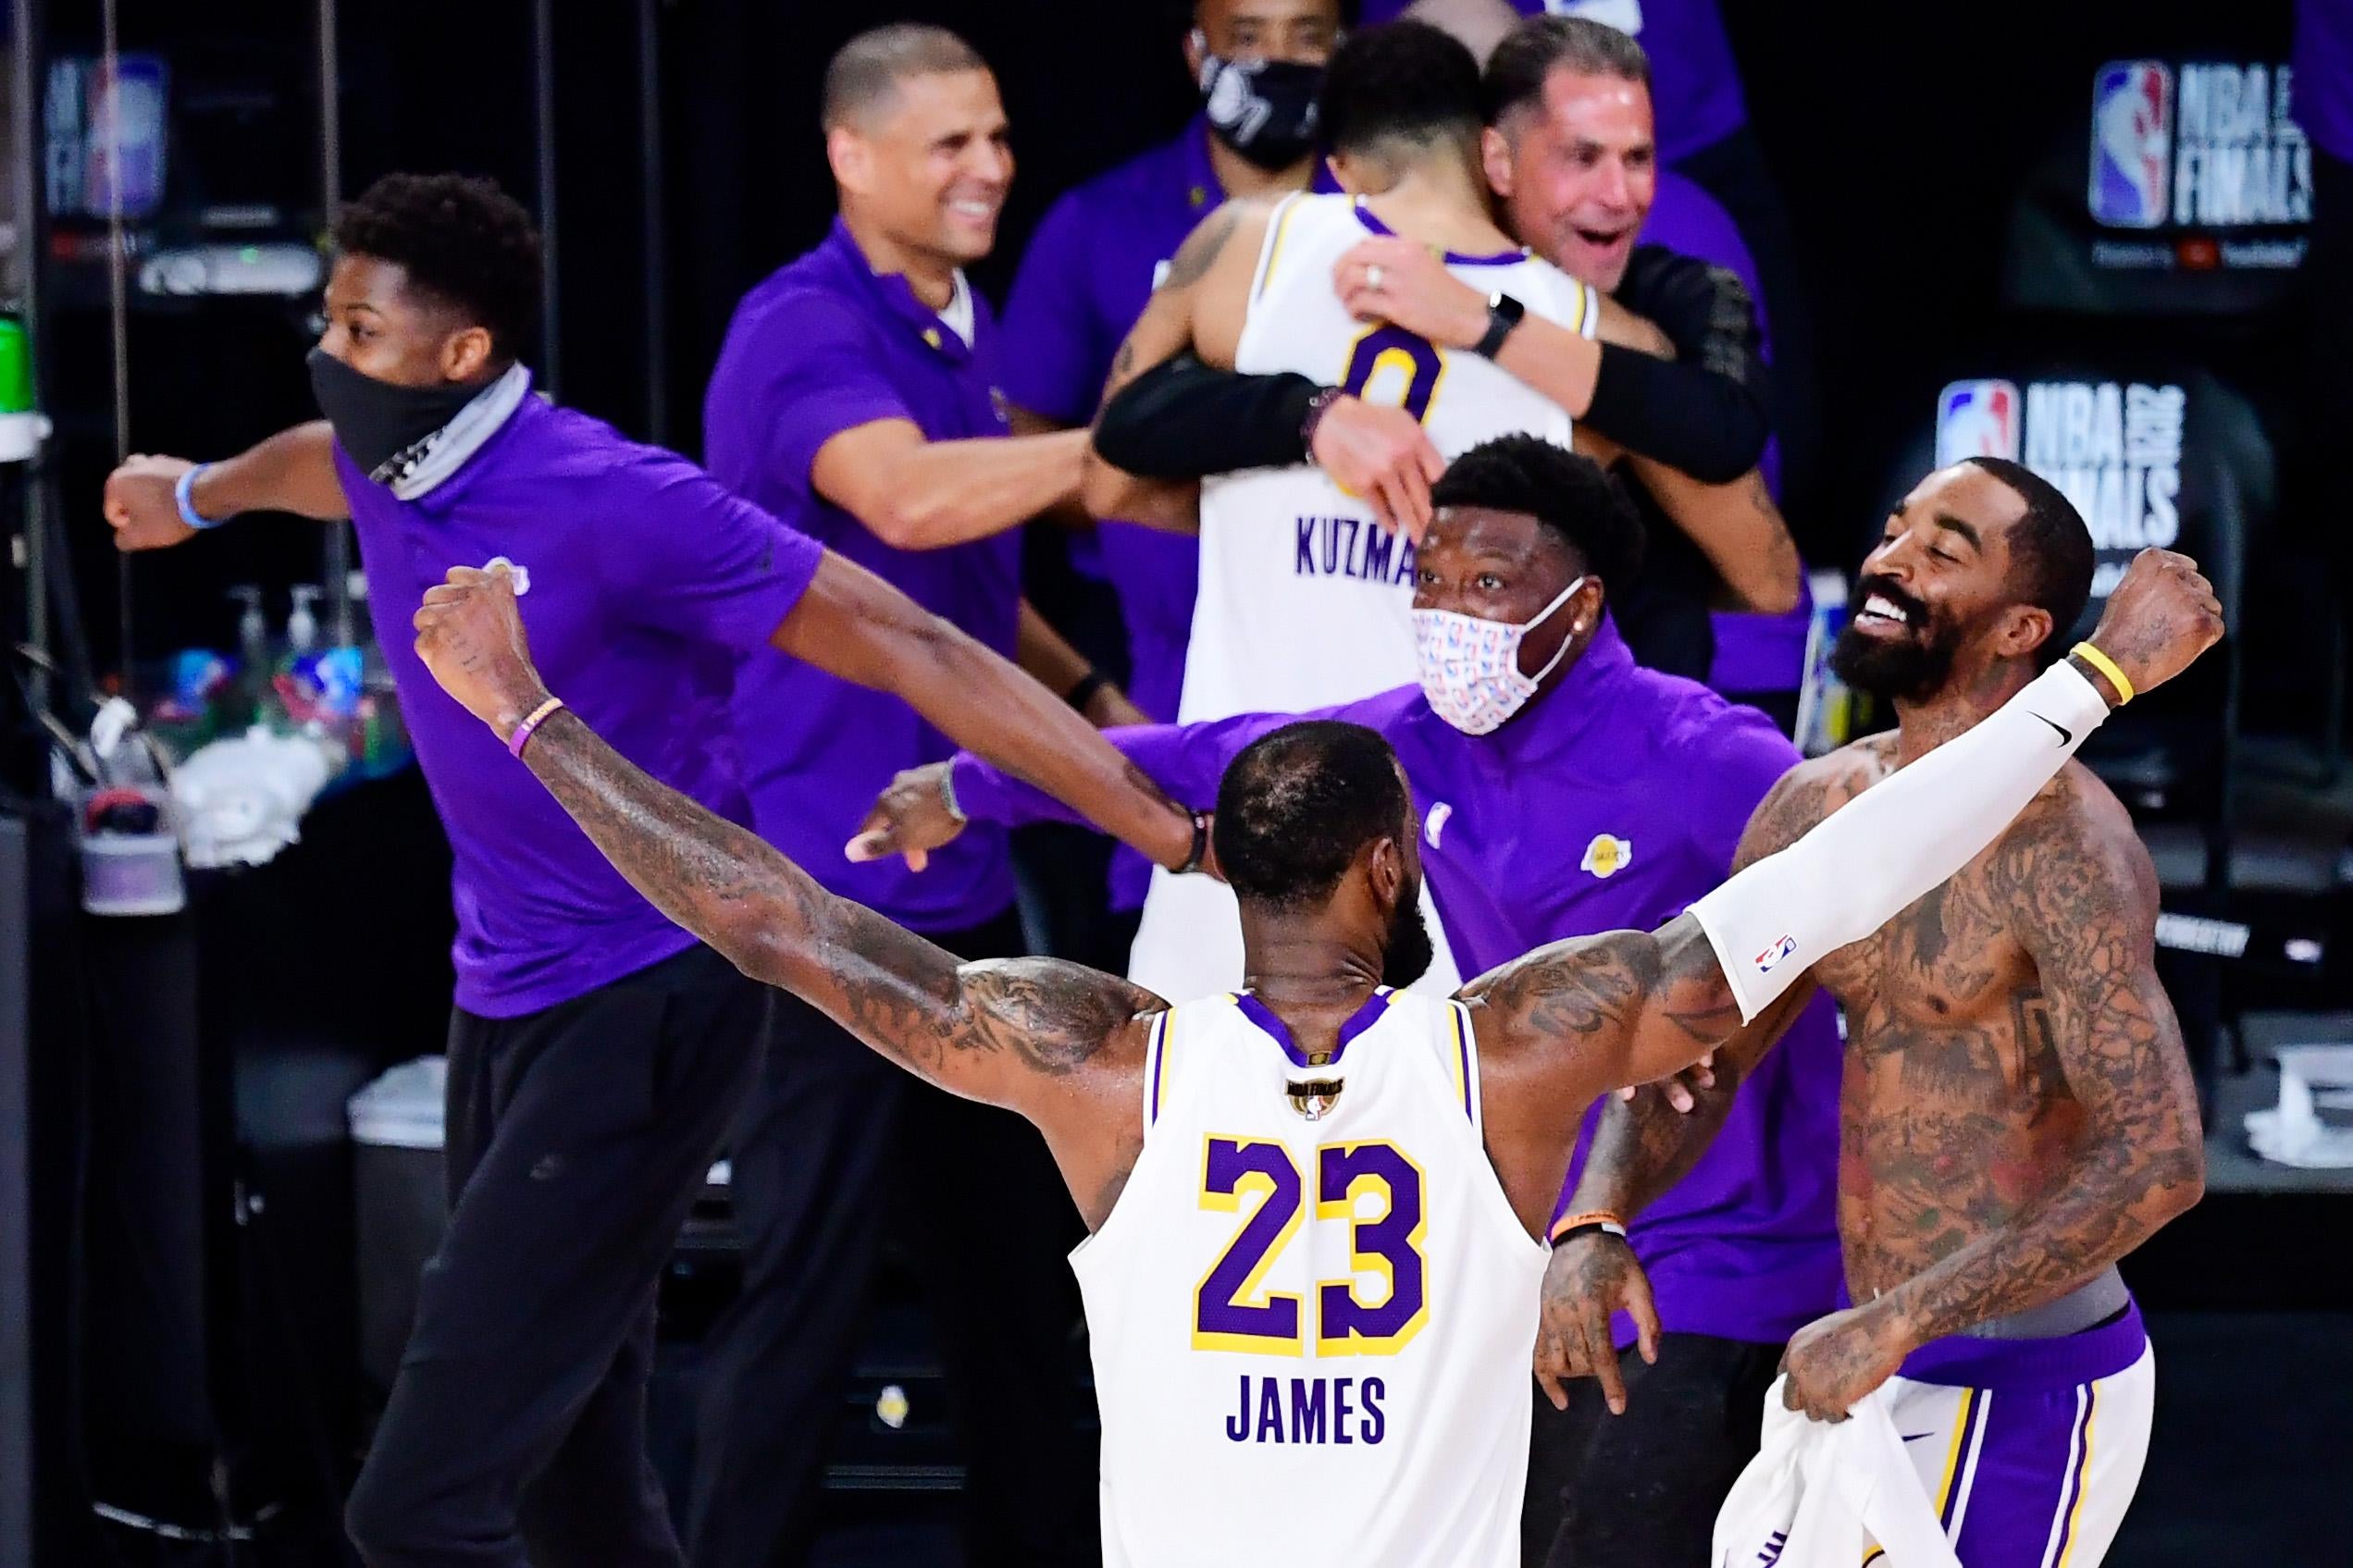 LeBron James celebrates winning the 2020 NBA Finals with his arms raised, beside smiling, shirtless teammate J.R. Smith and other Lakers in the background.